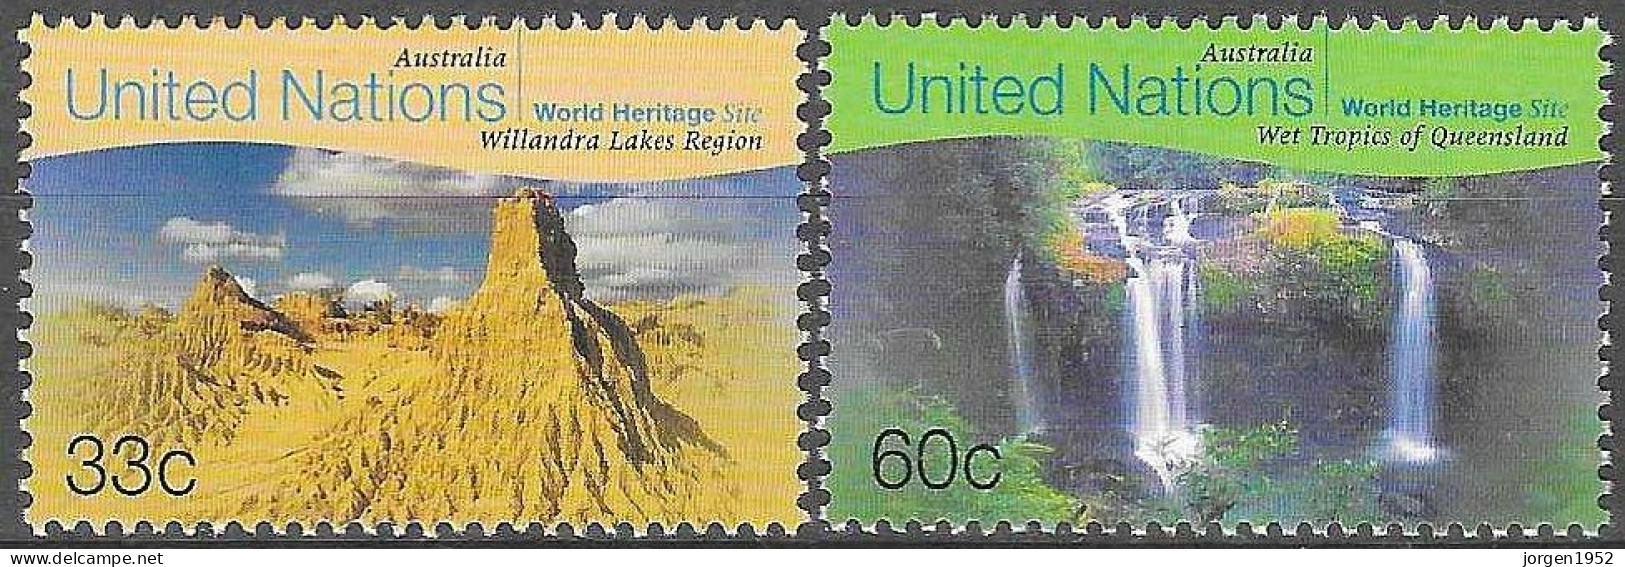 UNITED NATIONS # NEW YORK FROM 1999 STAMPWORLD 807-08** - Unused Stamps